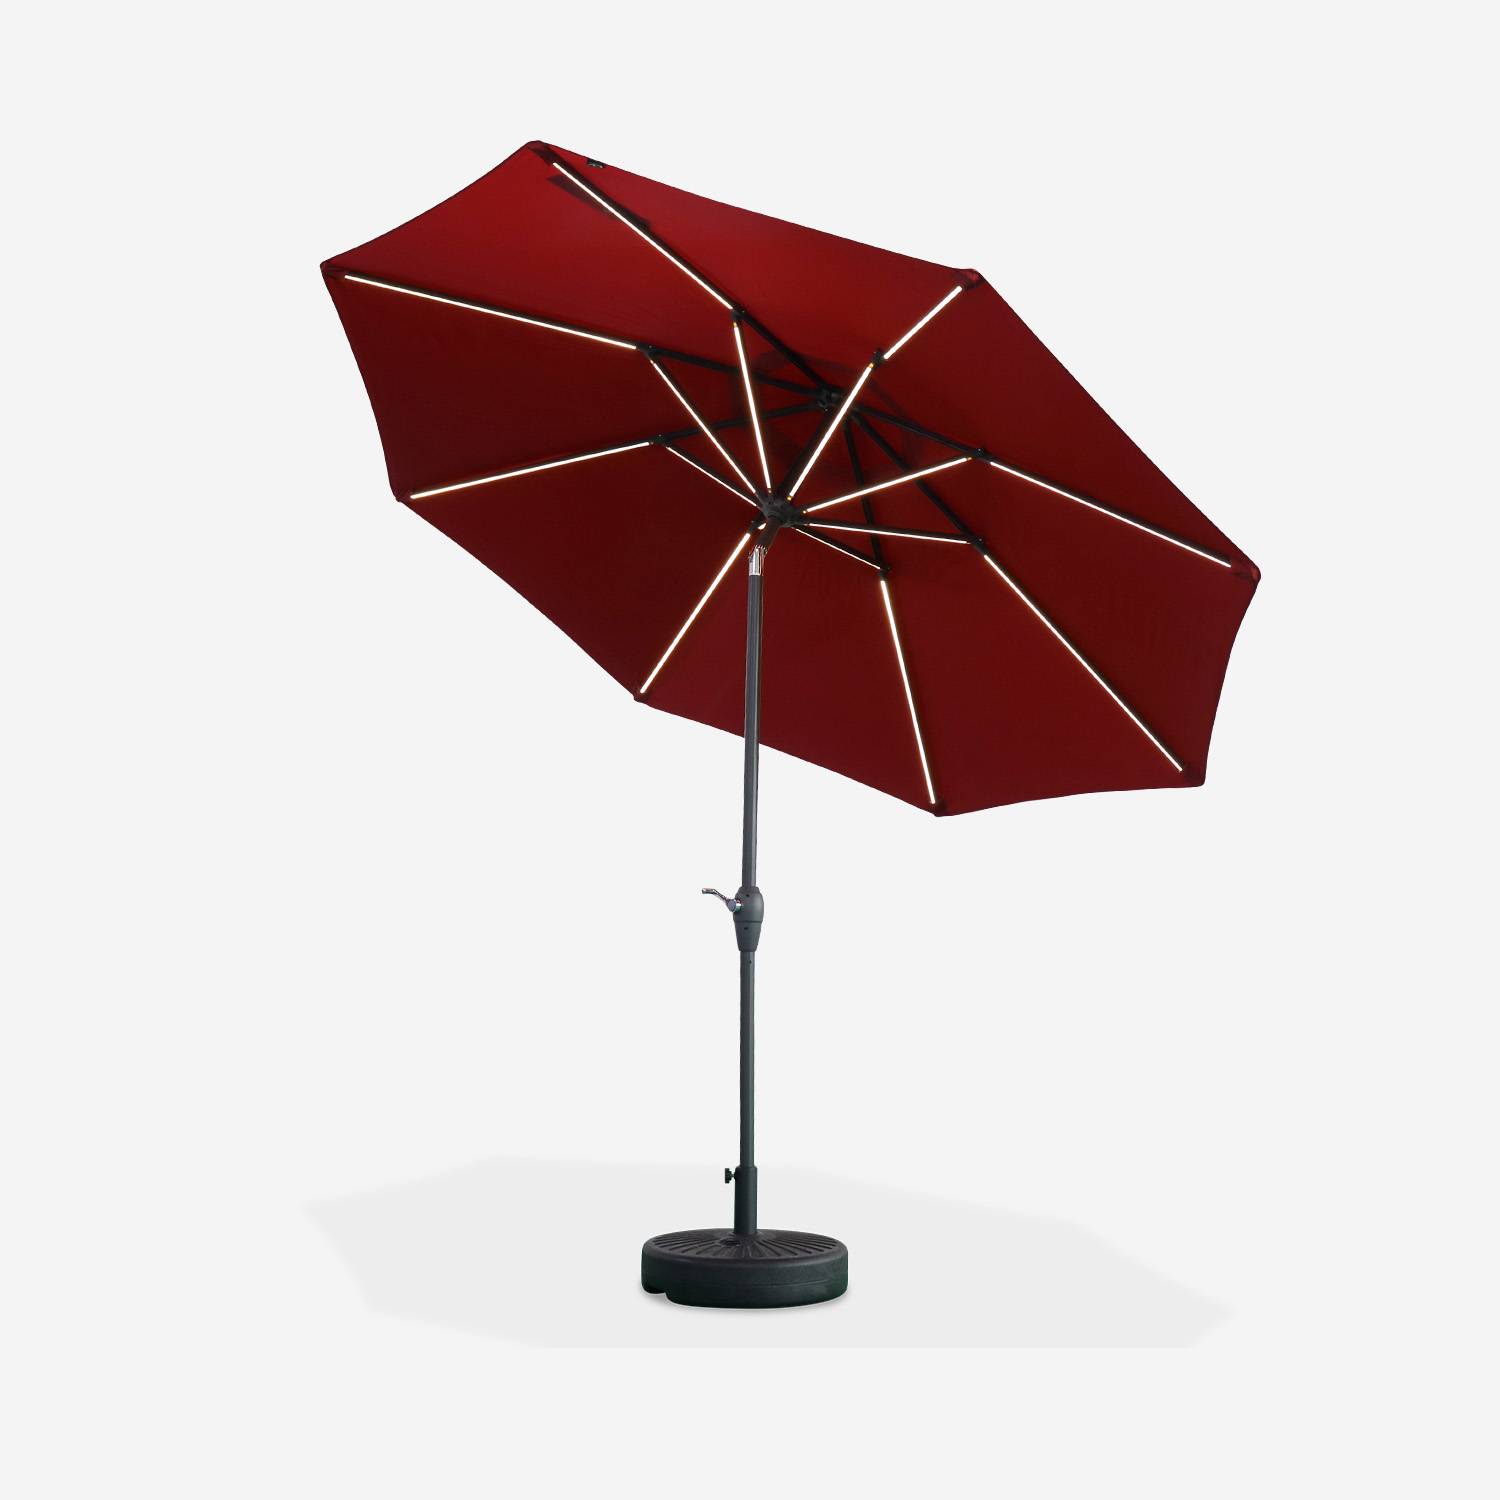 2.7m round centre pole LED parasol - adjustable aluminium central mast and crank handle opening - Helios - Red,sweeek,Photo4